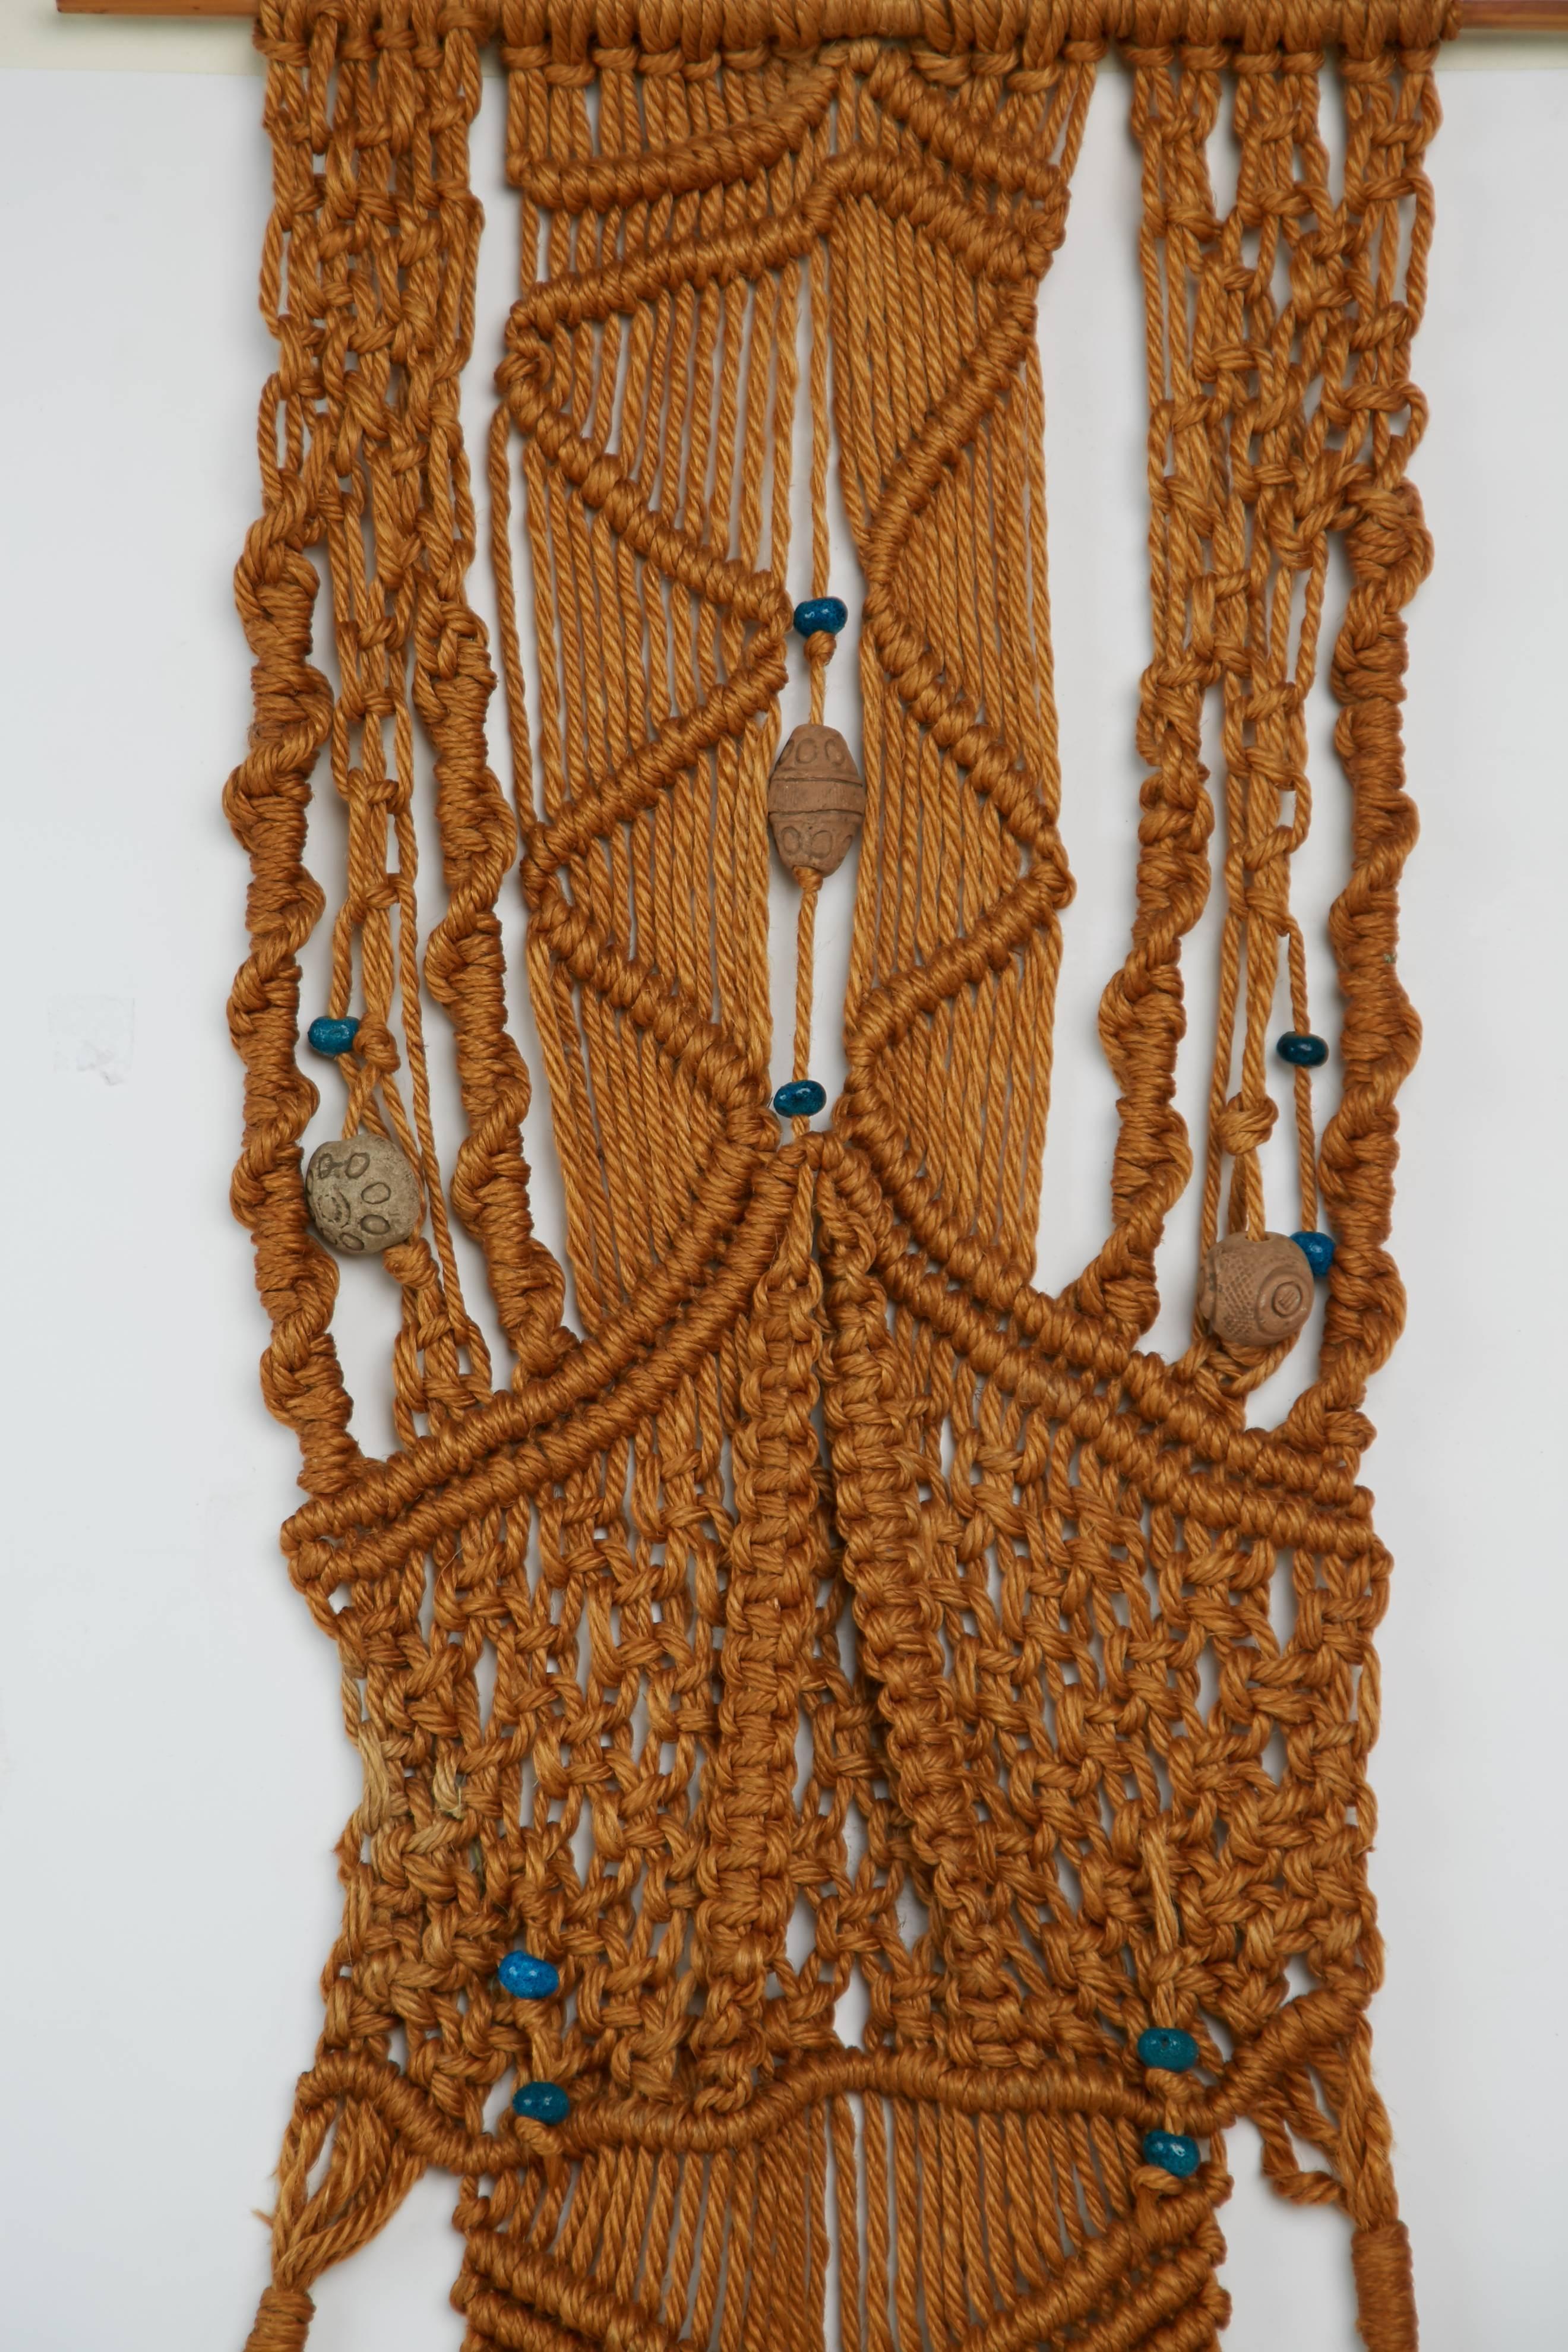 A wonderful example of the fiber arts movement. This large 72